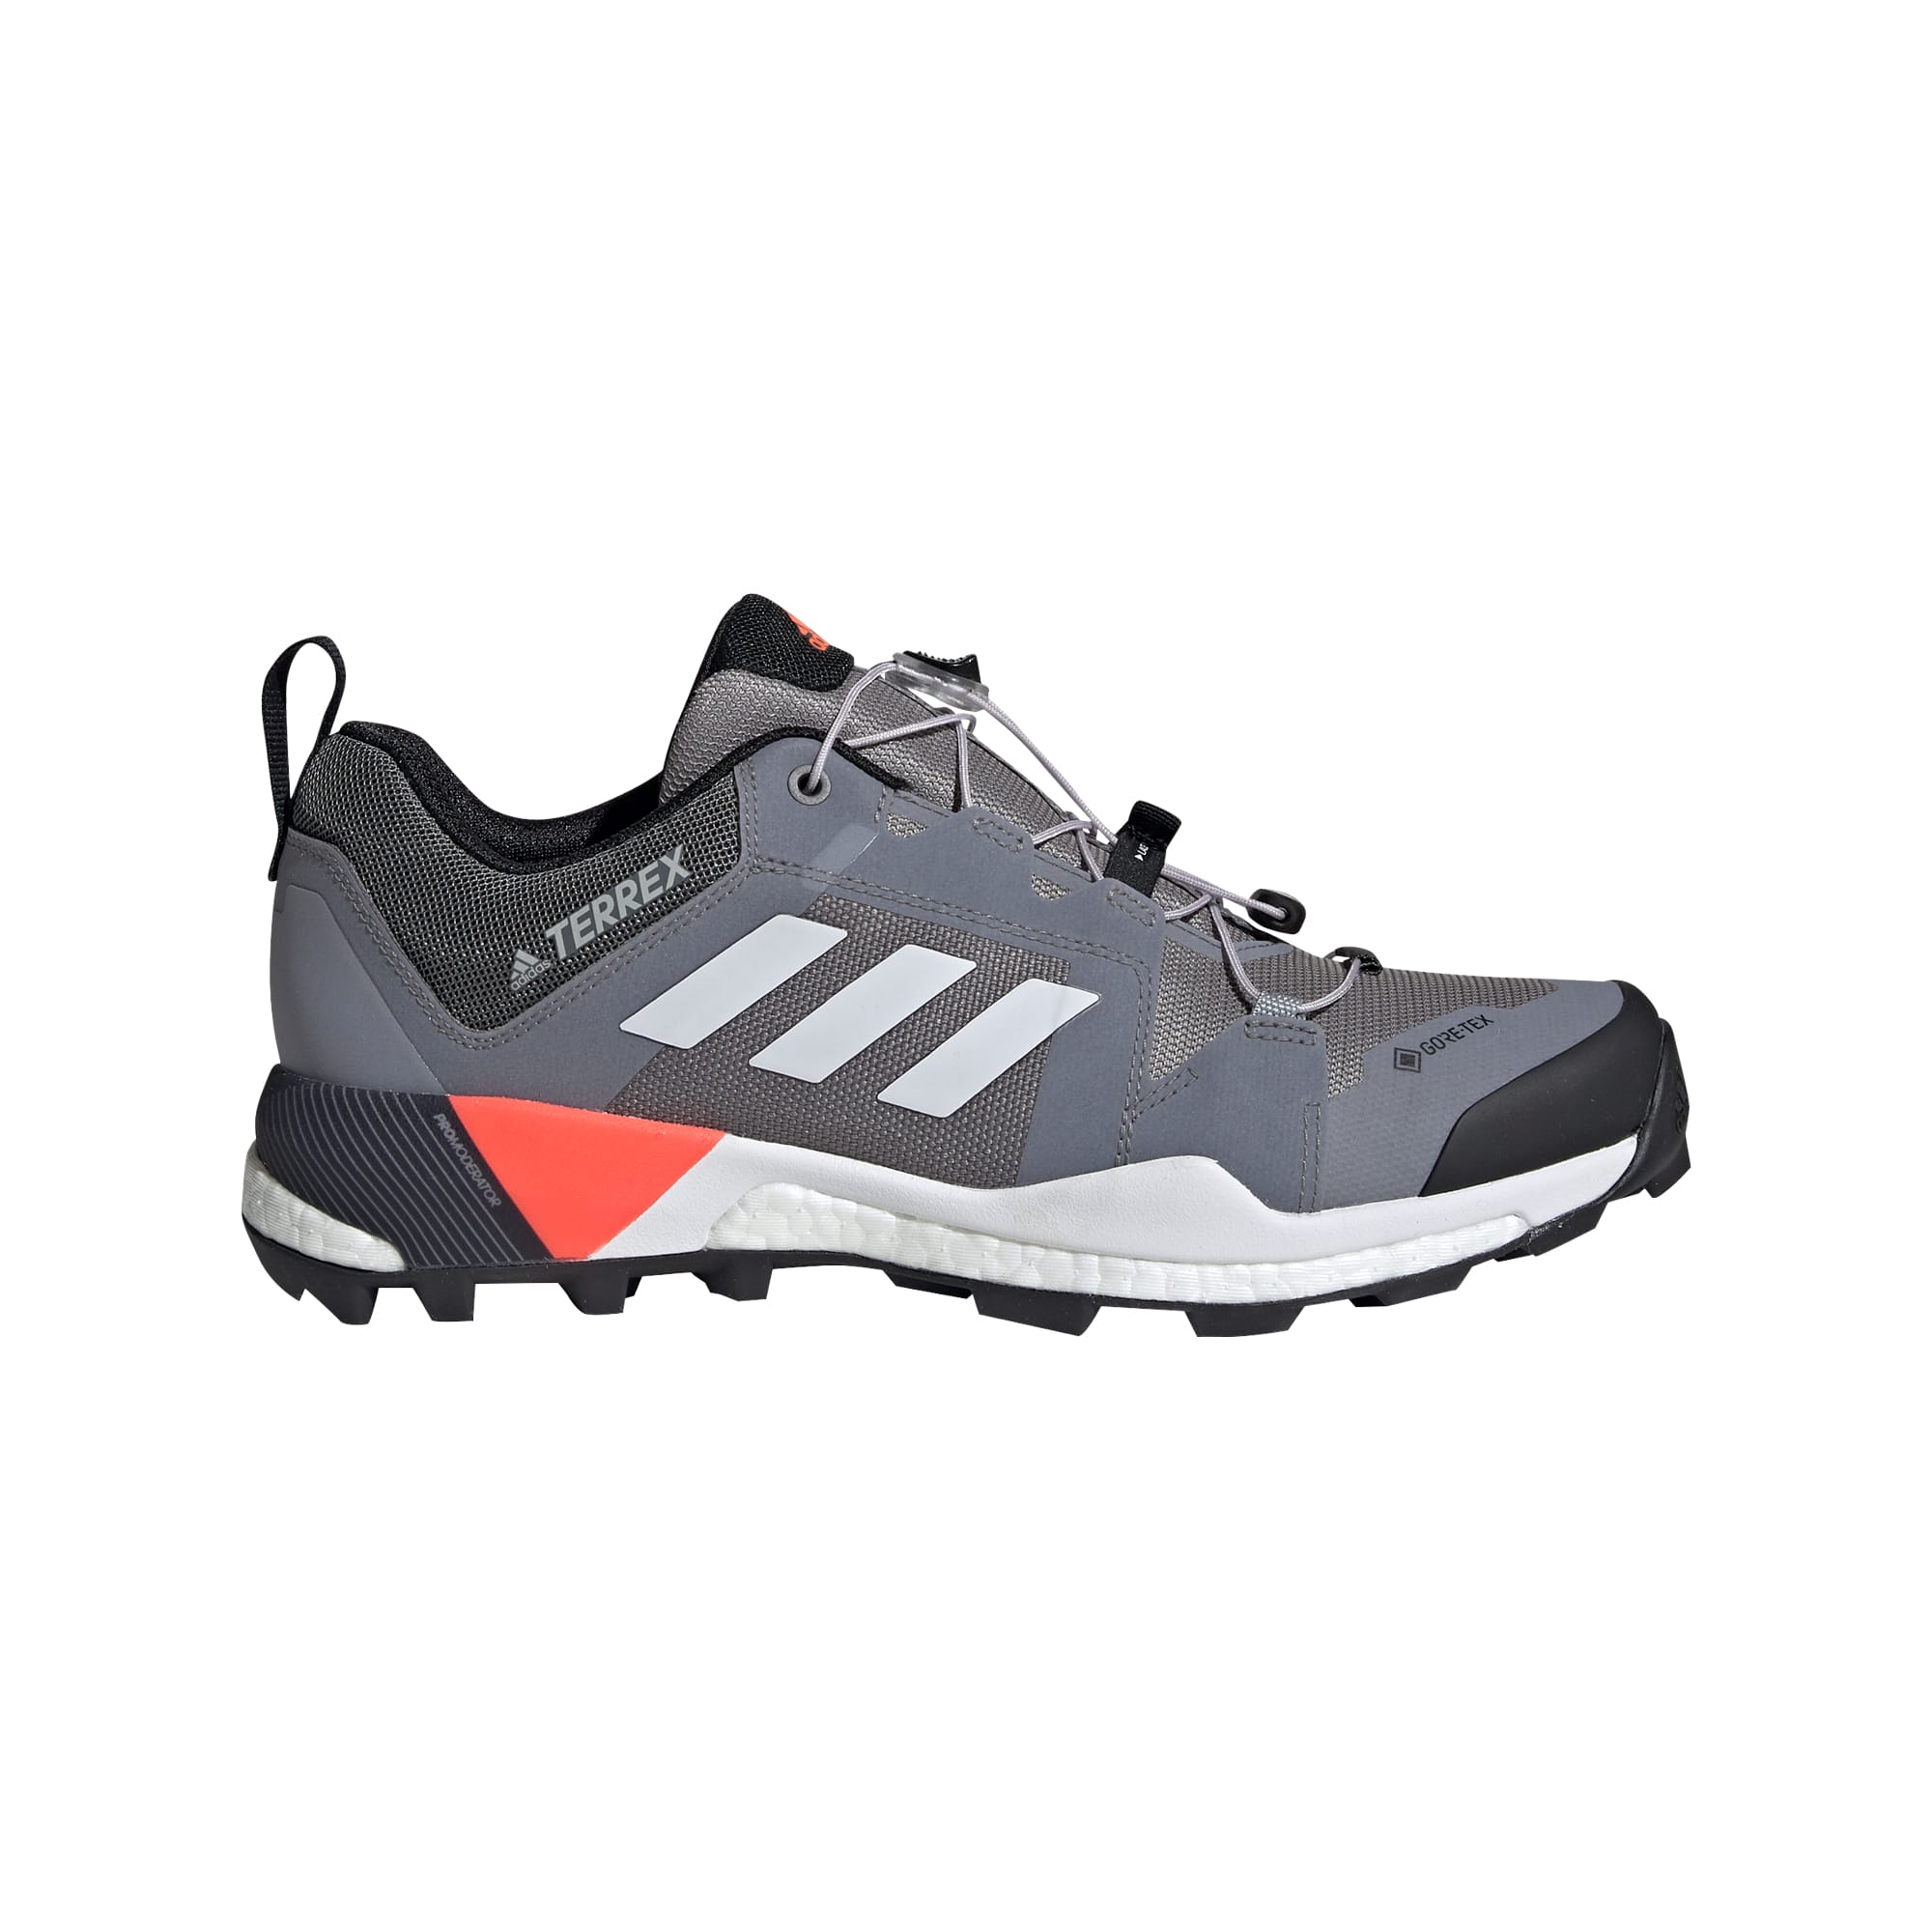 Buy Adidas Men's Terrex XT Gore-Tex from Outnorth